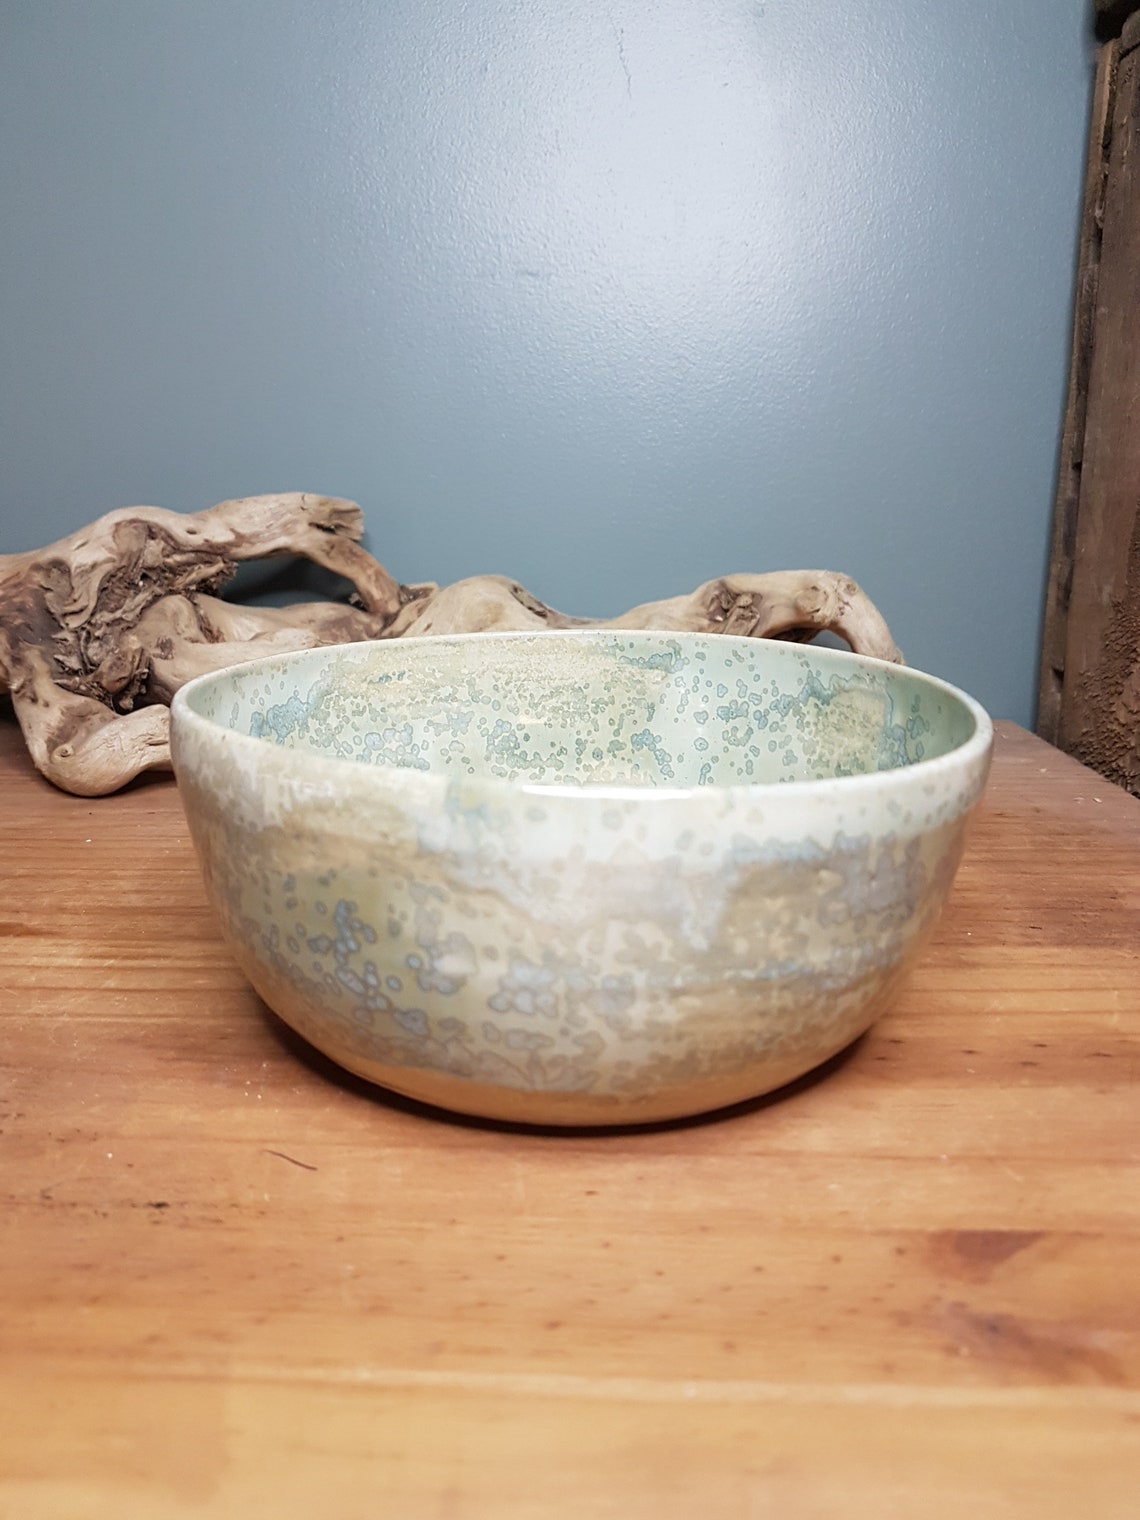 Enamelled sandstone bowl made with potter's turn water | Etsy